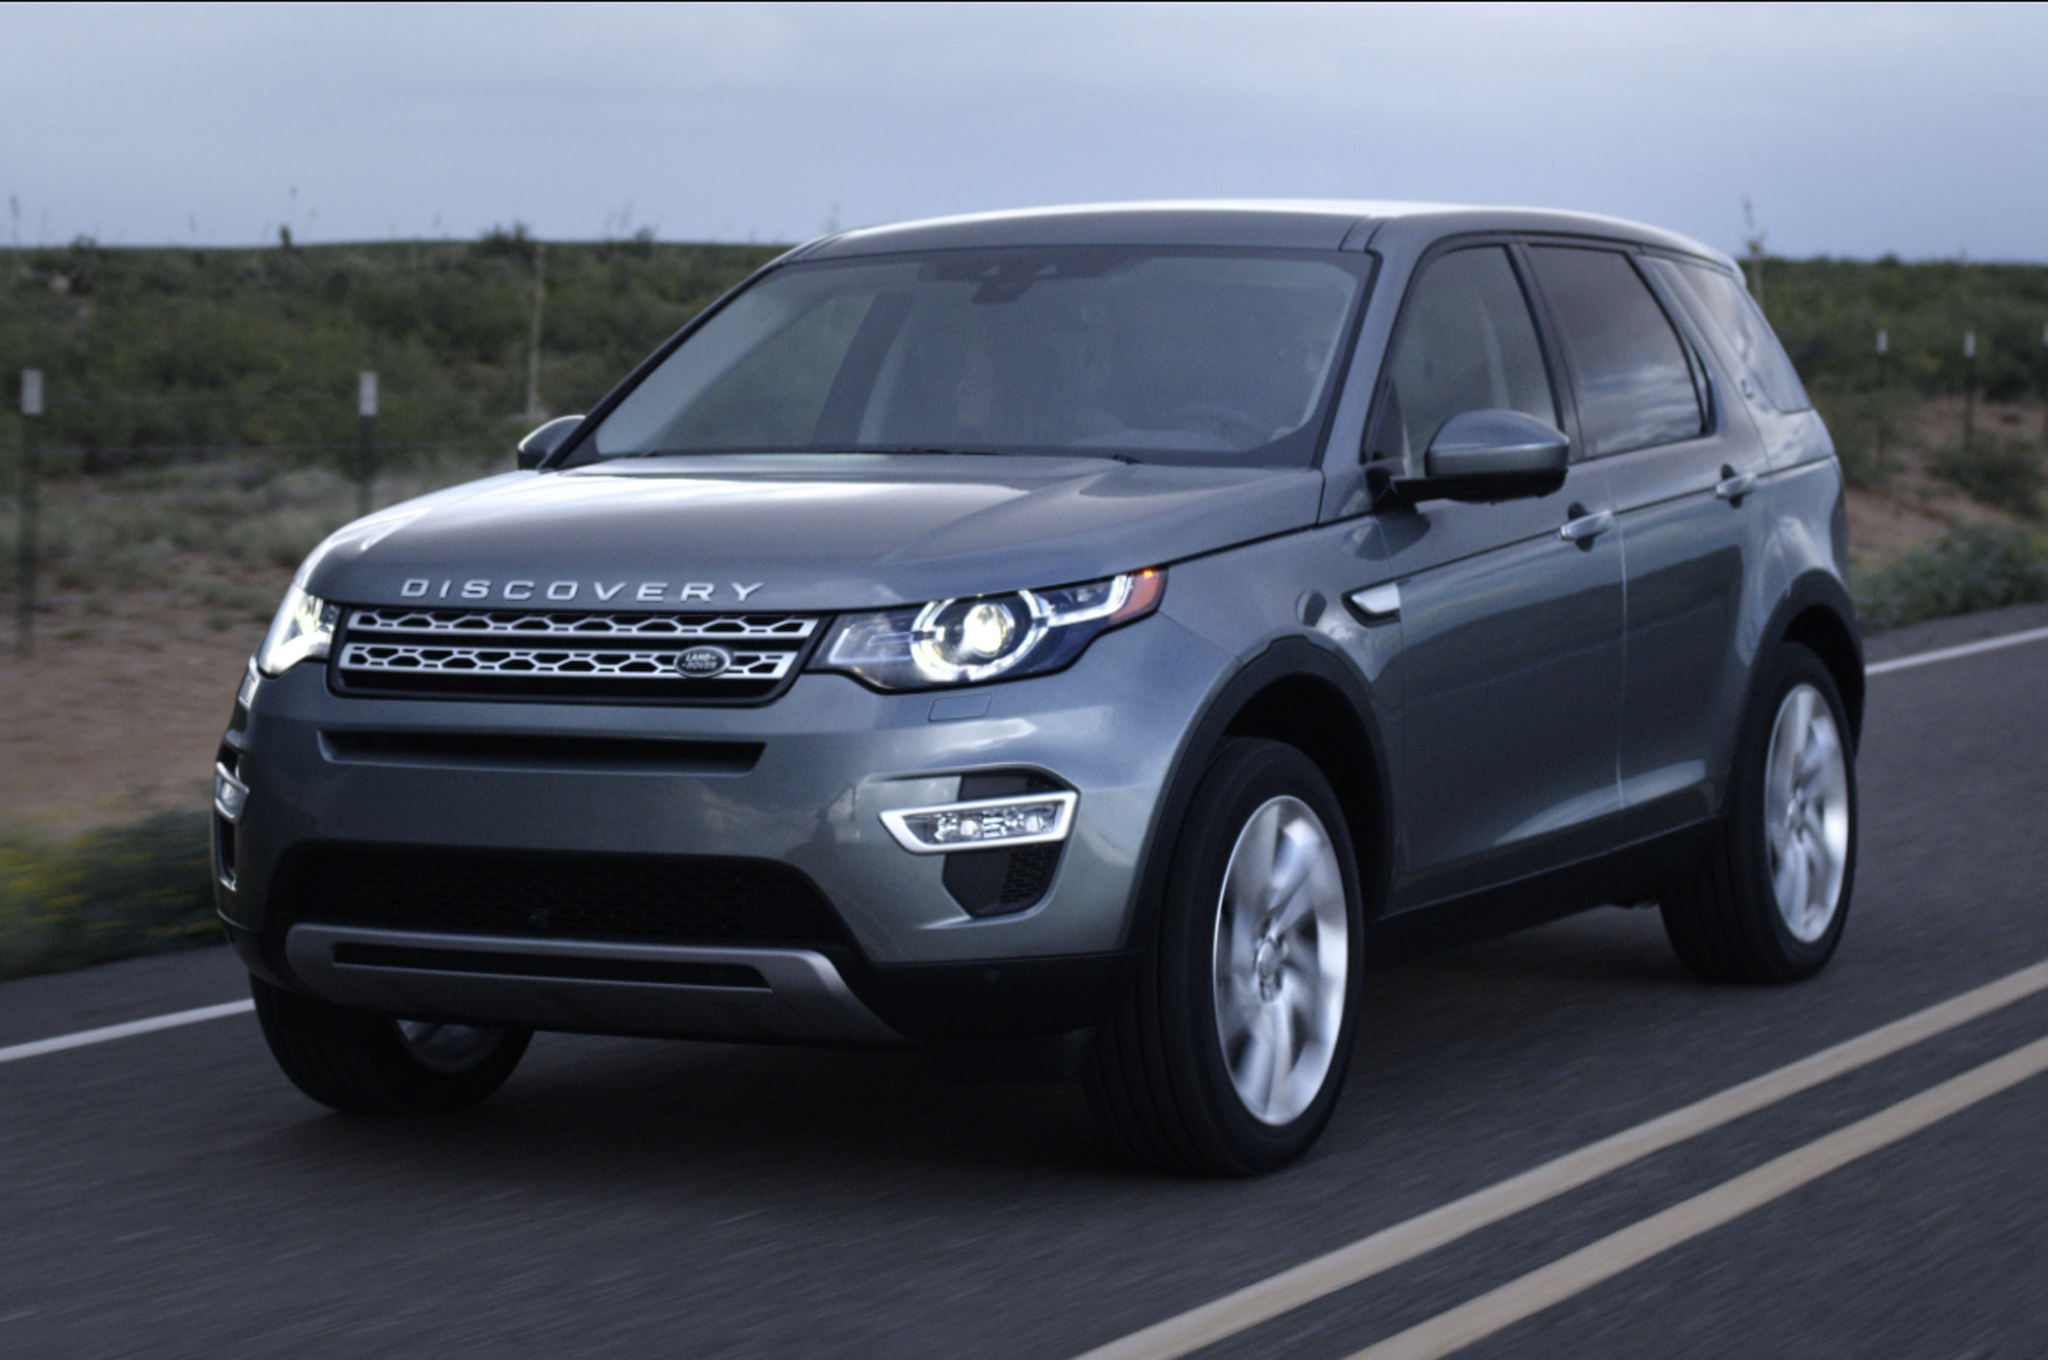 HQ Land Rover Discovery Wallpapers | File 1188.84Kb